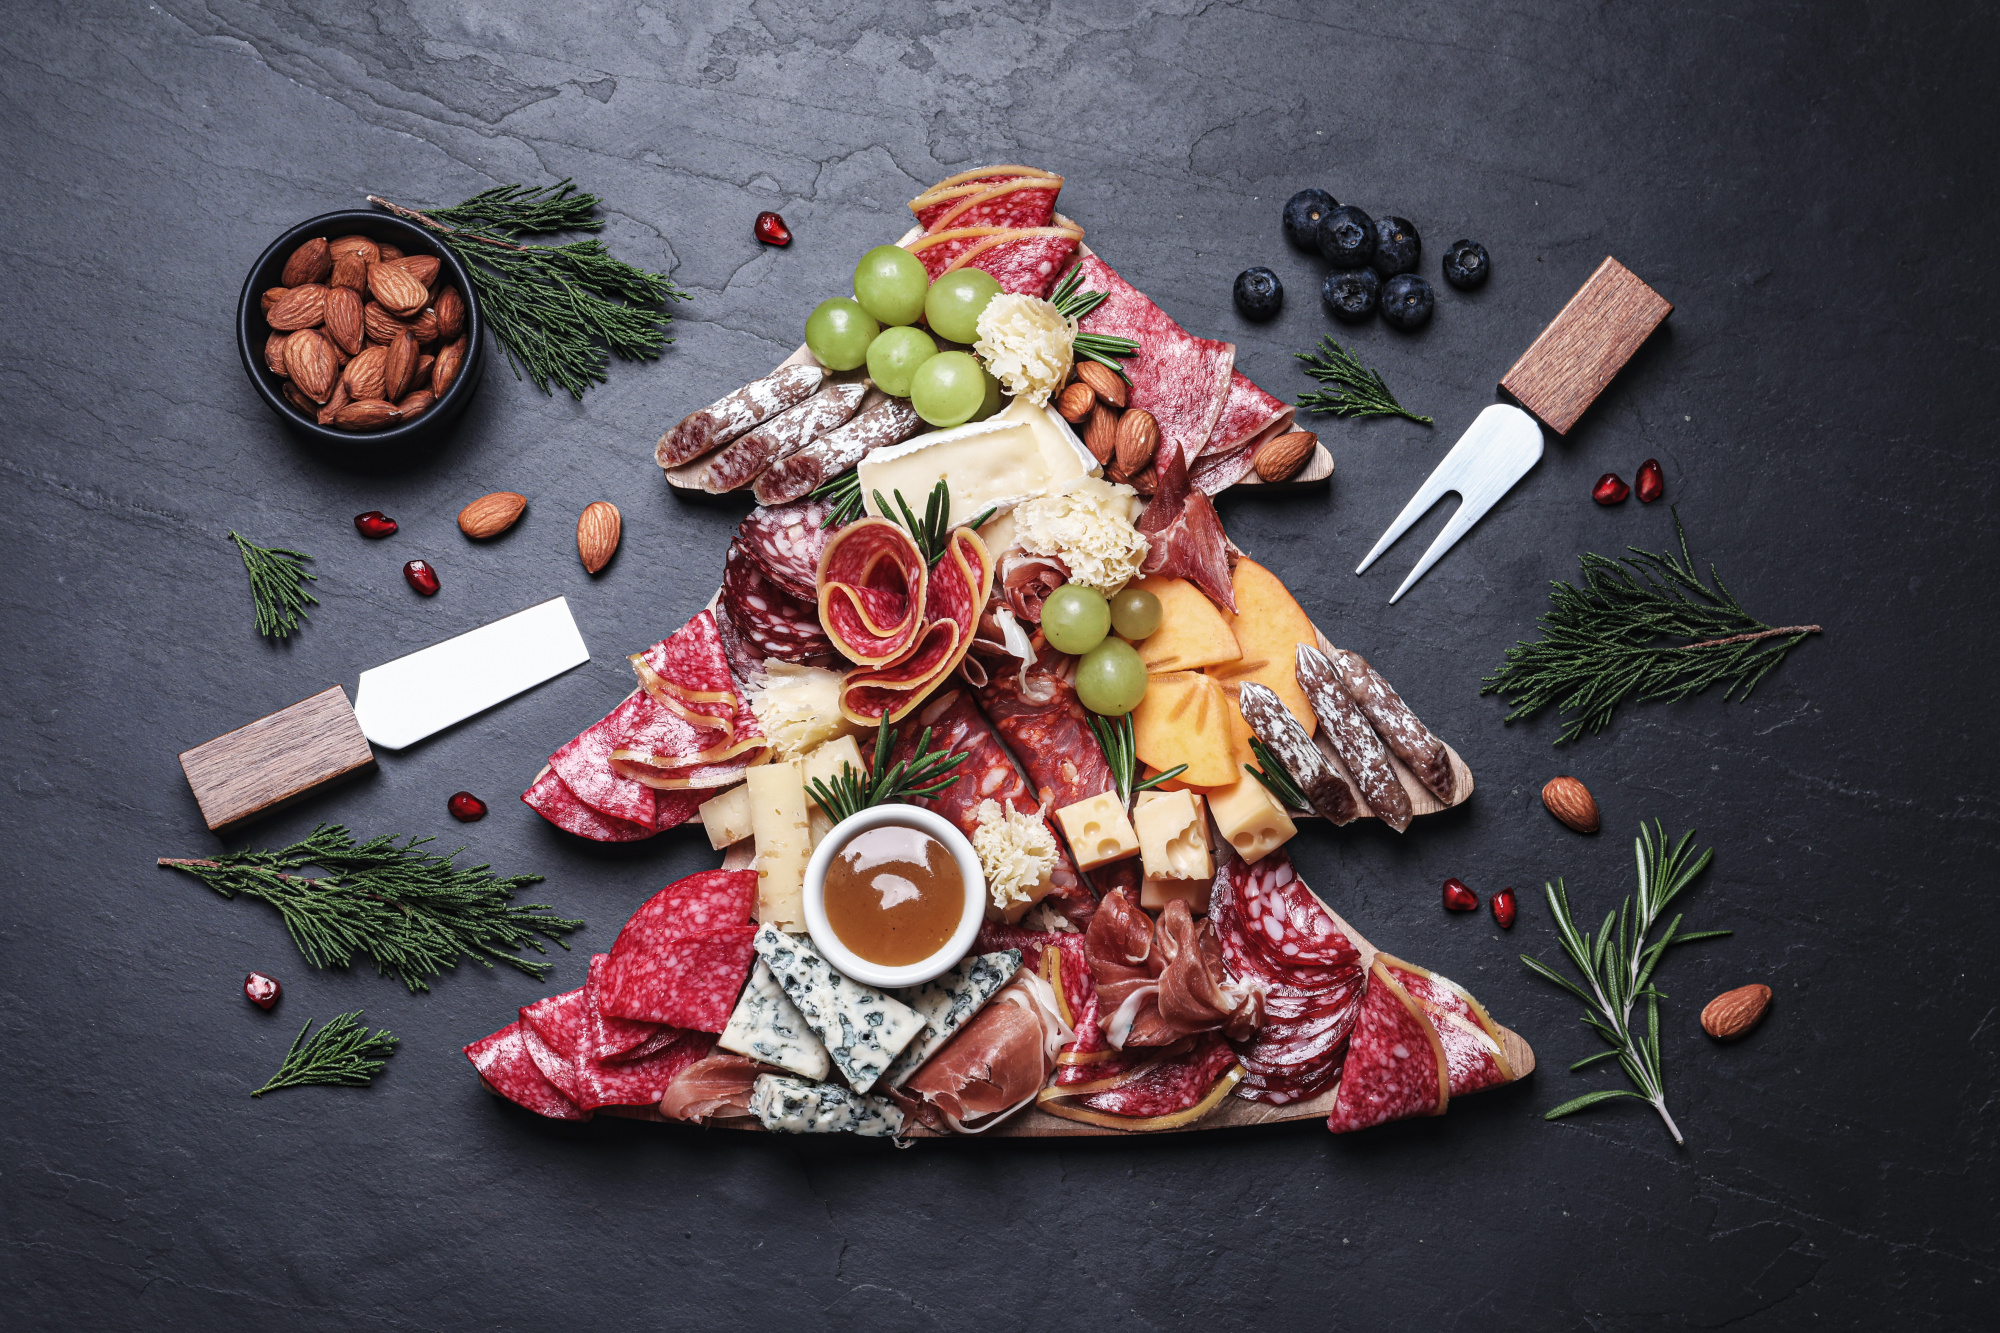 charcuterie board shaped as Christmas tree, Fir tree shaped board with different appetizers and sauce on black table, appetizers for the Holidays, how to make a charcuterie board, cheese board